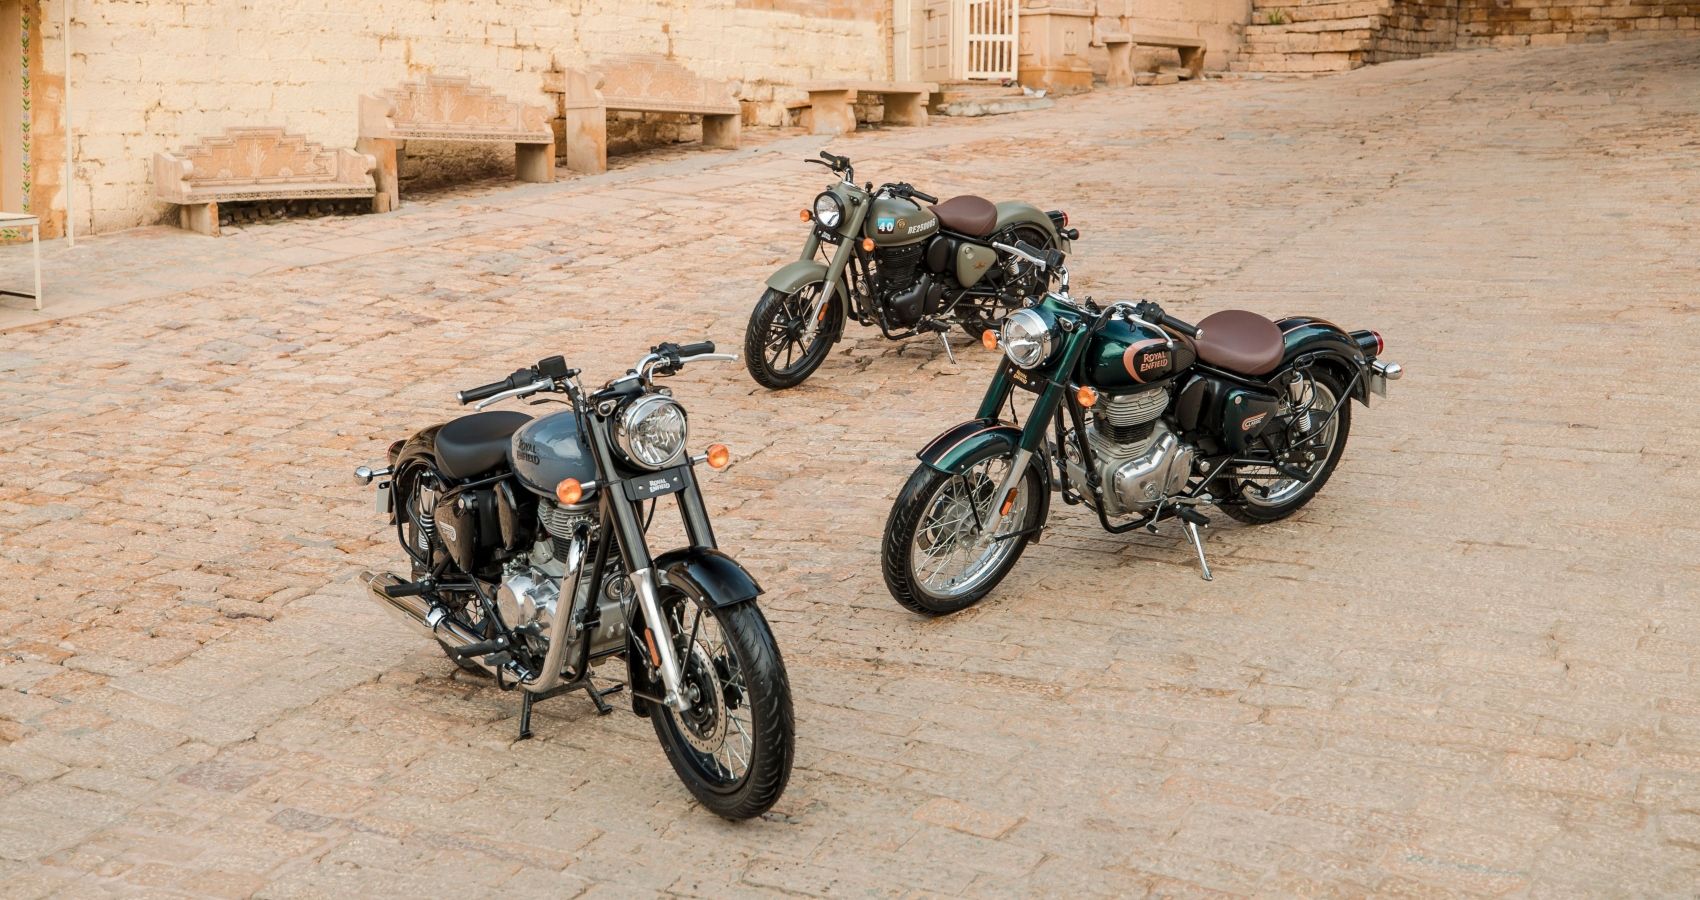 India's Royal Enfield Motorcycle Is Coming After Harley-Davidson